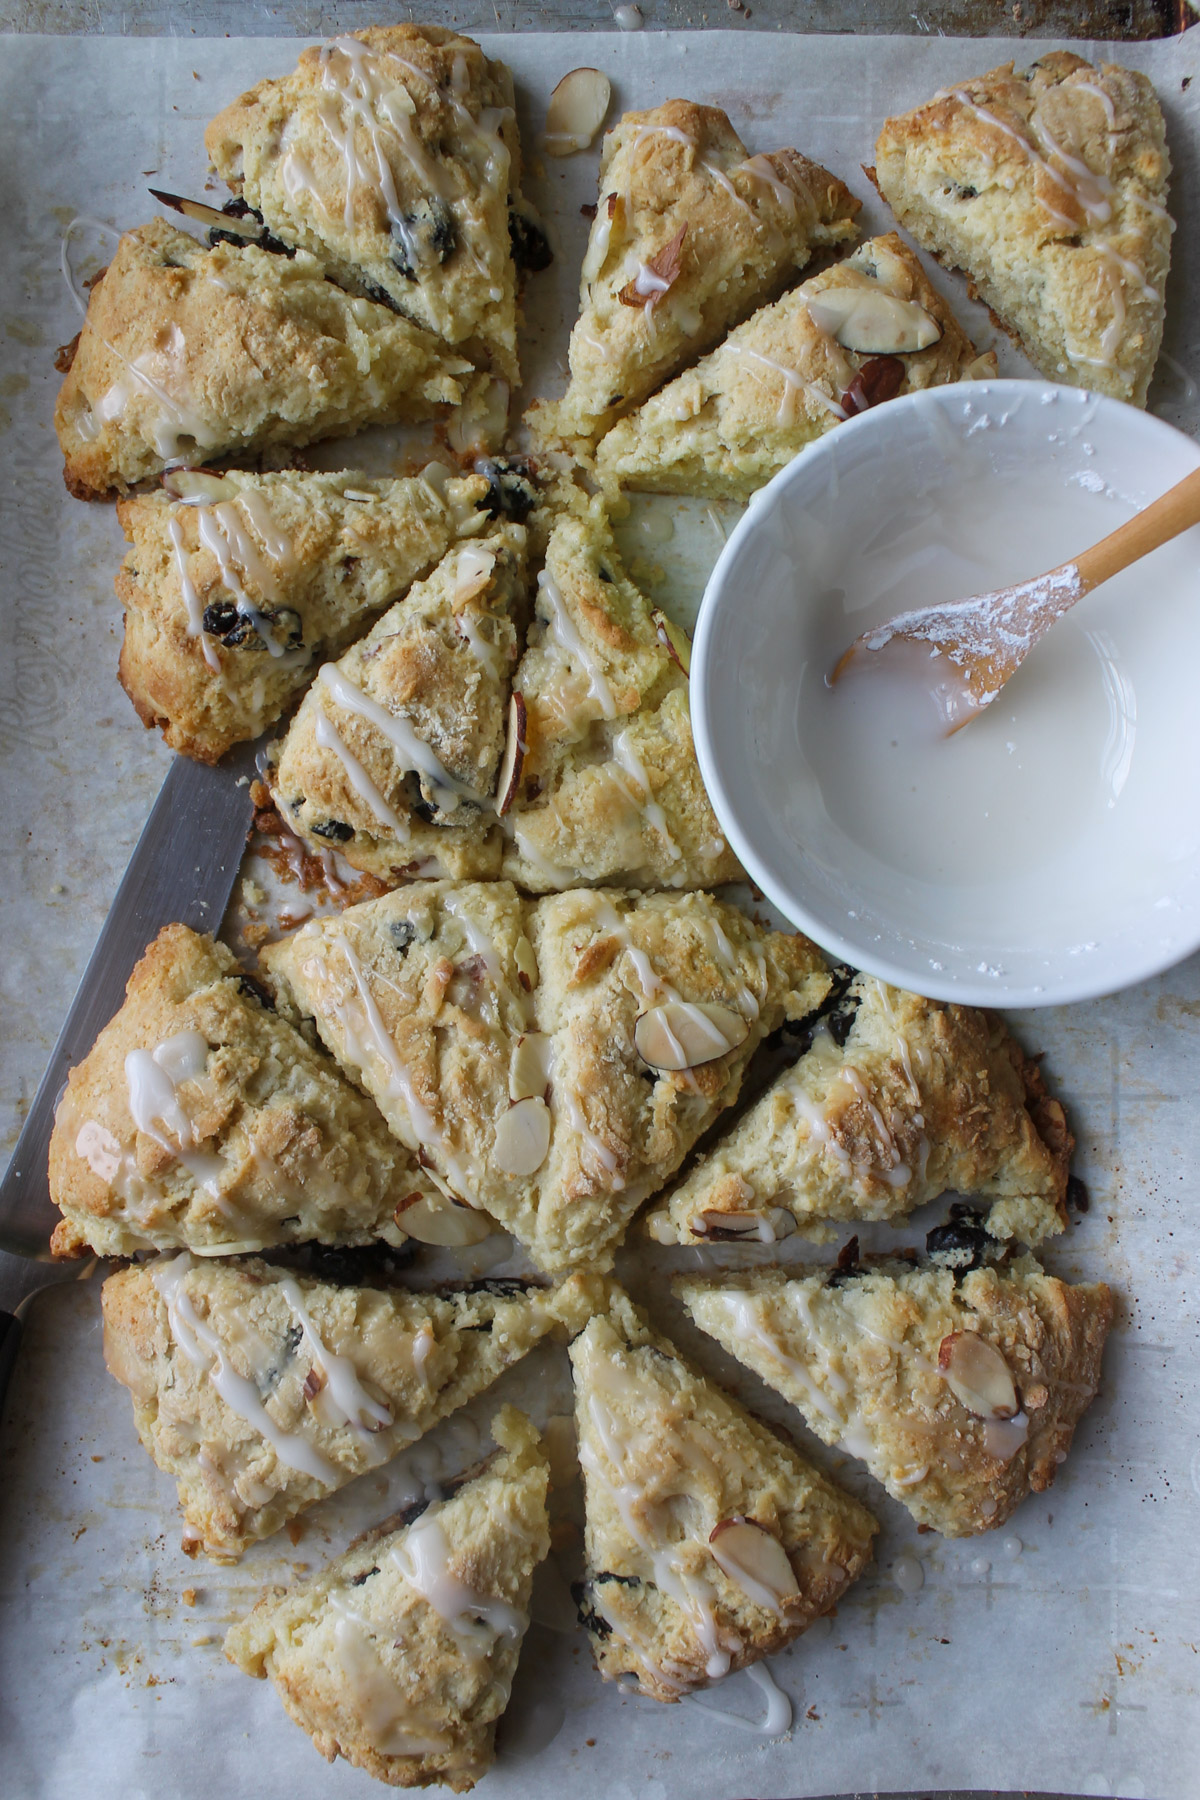 Two round disks of scones cut into wedges on parchment paper with a bowl of glaze.